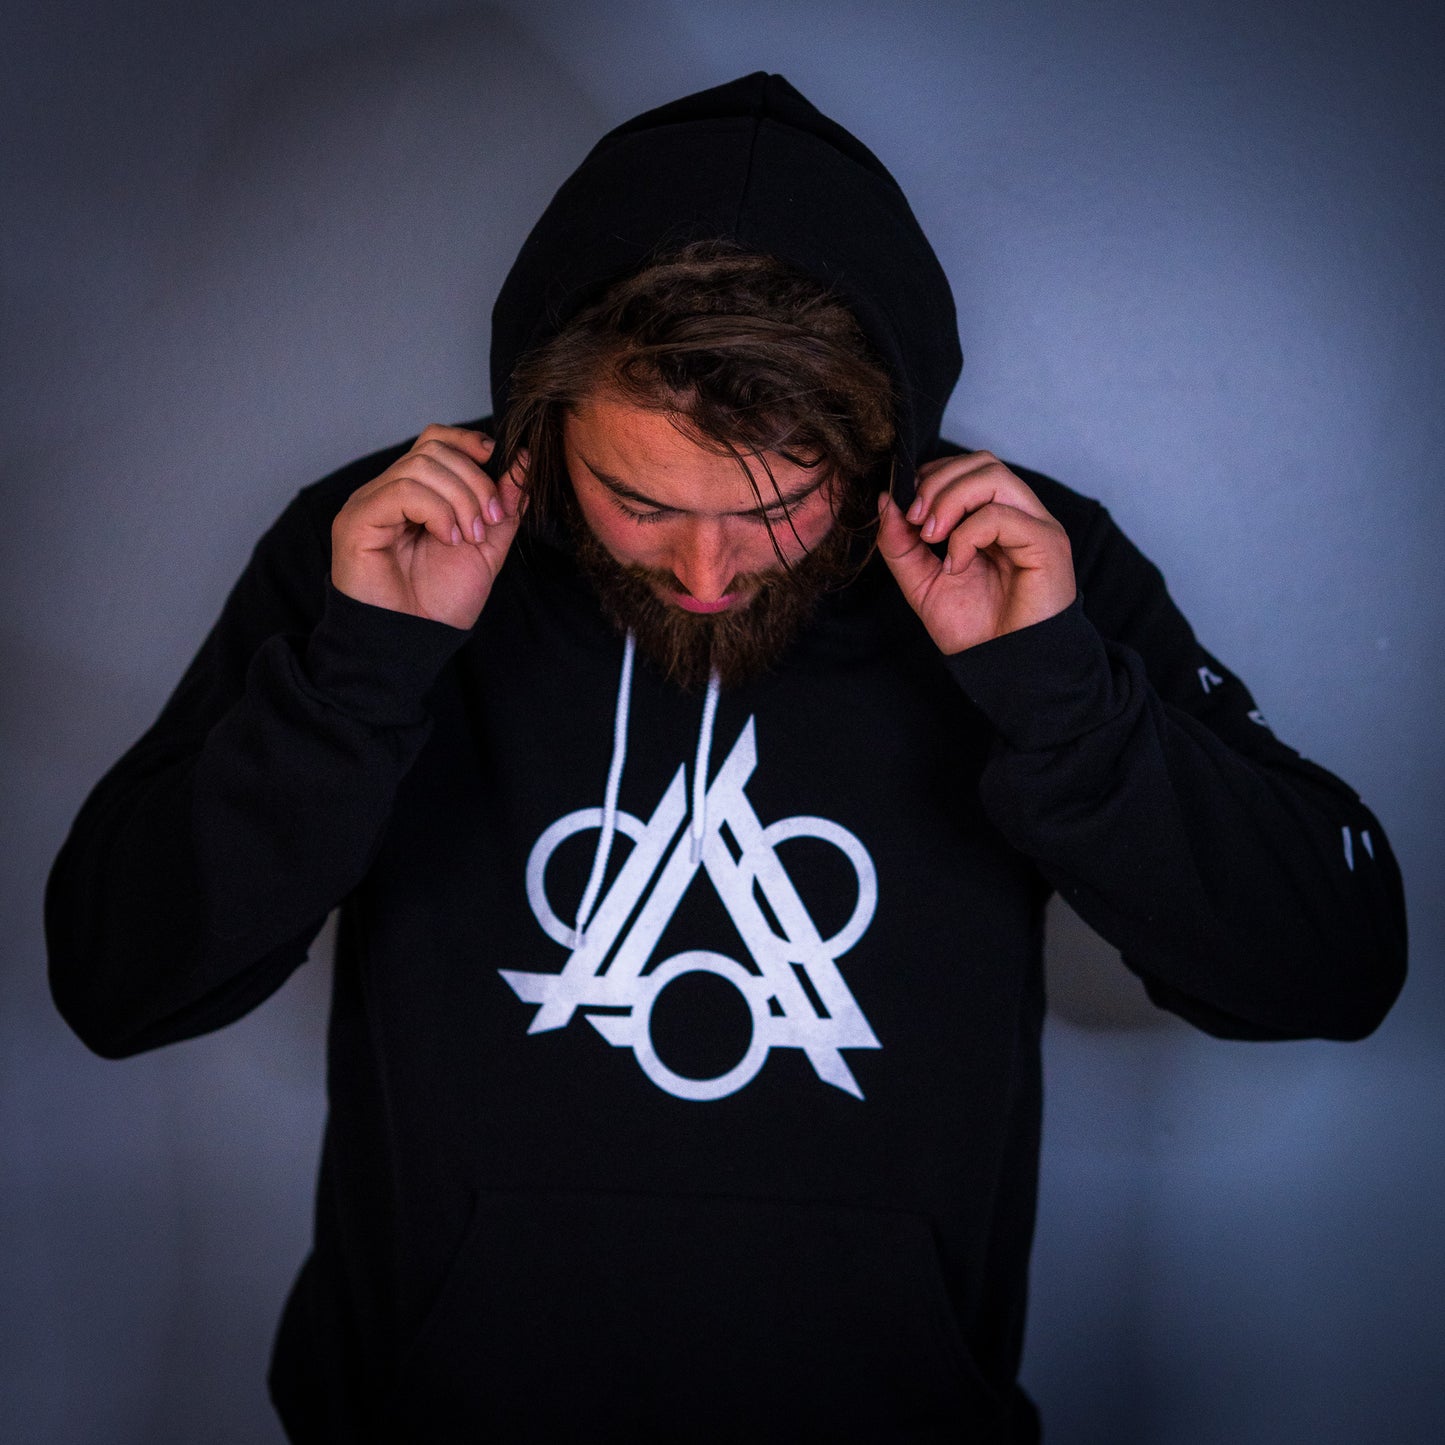 Phase Shift Hoodie